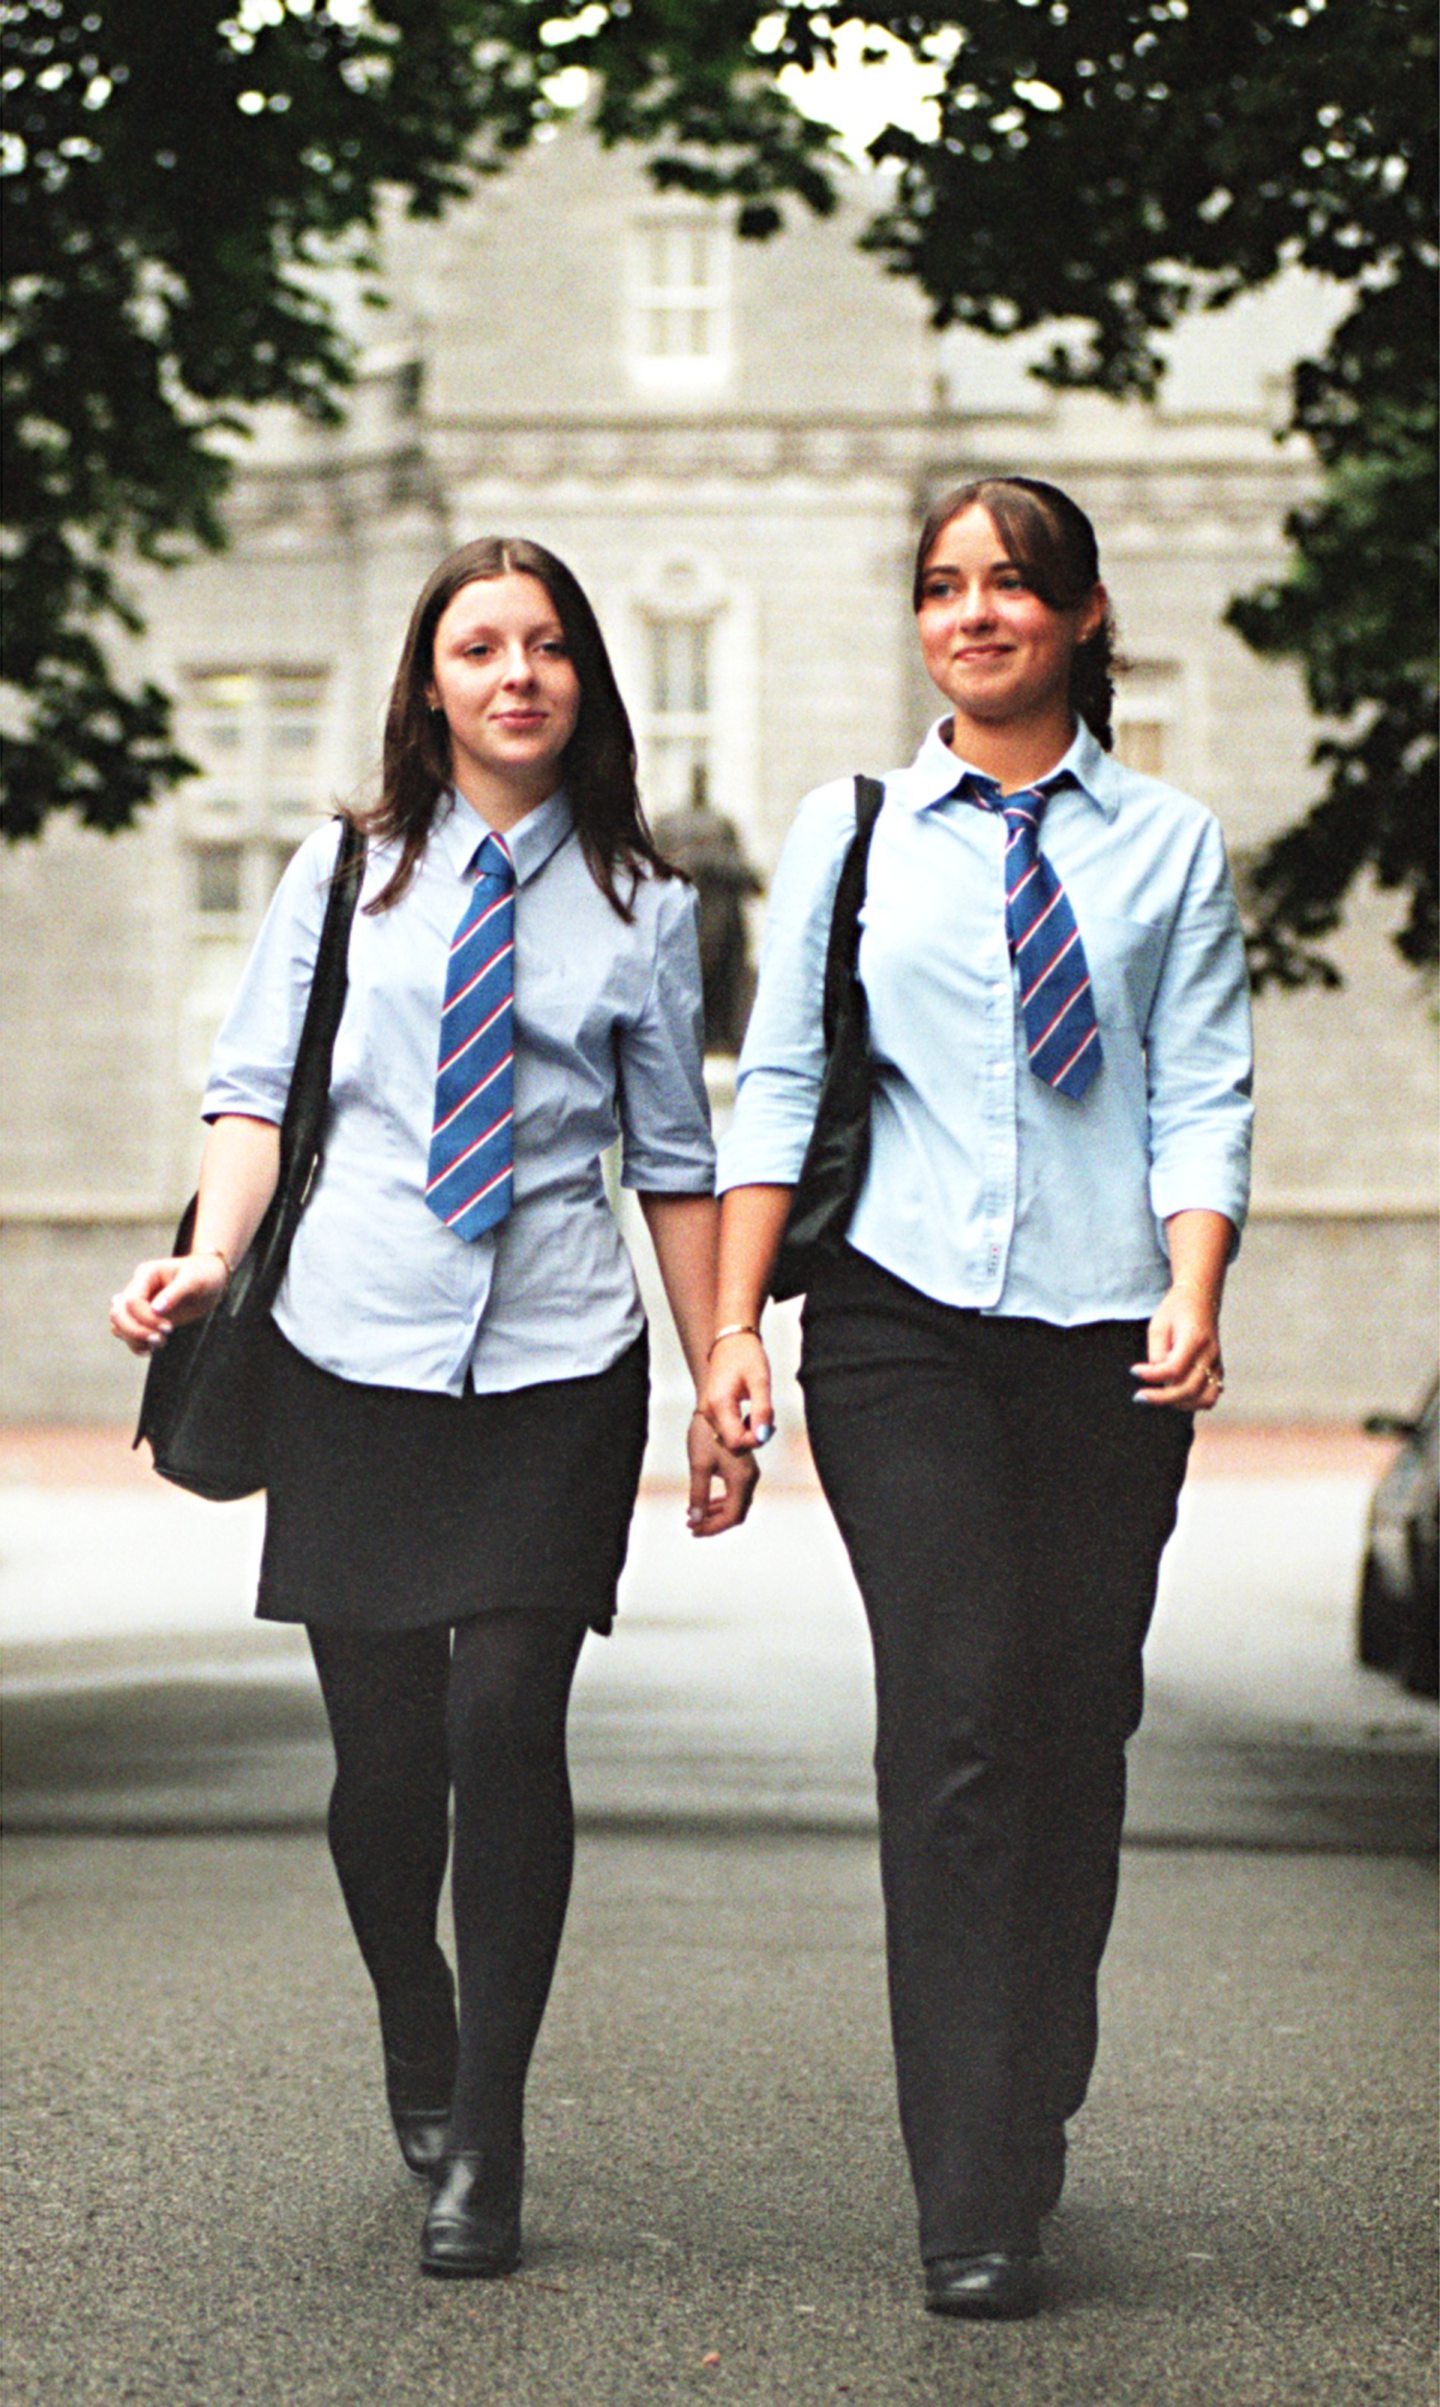 Grammar pupils Amy Farquhar, and Chiara Tancredi illustrate the female school uniform after a change in policy in 1999.